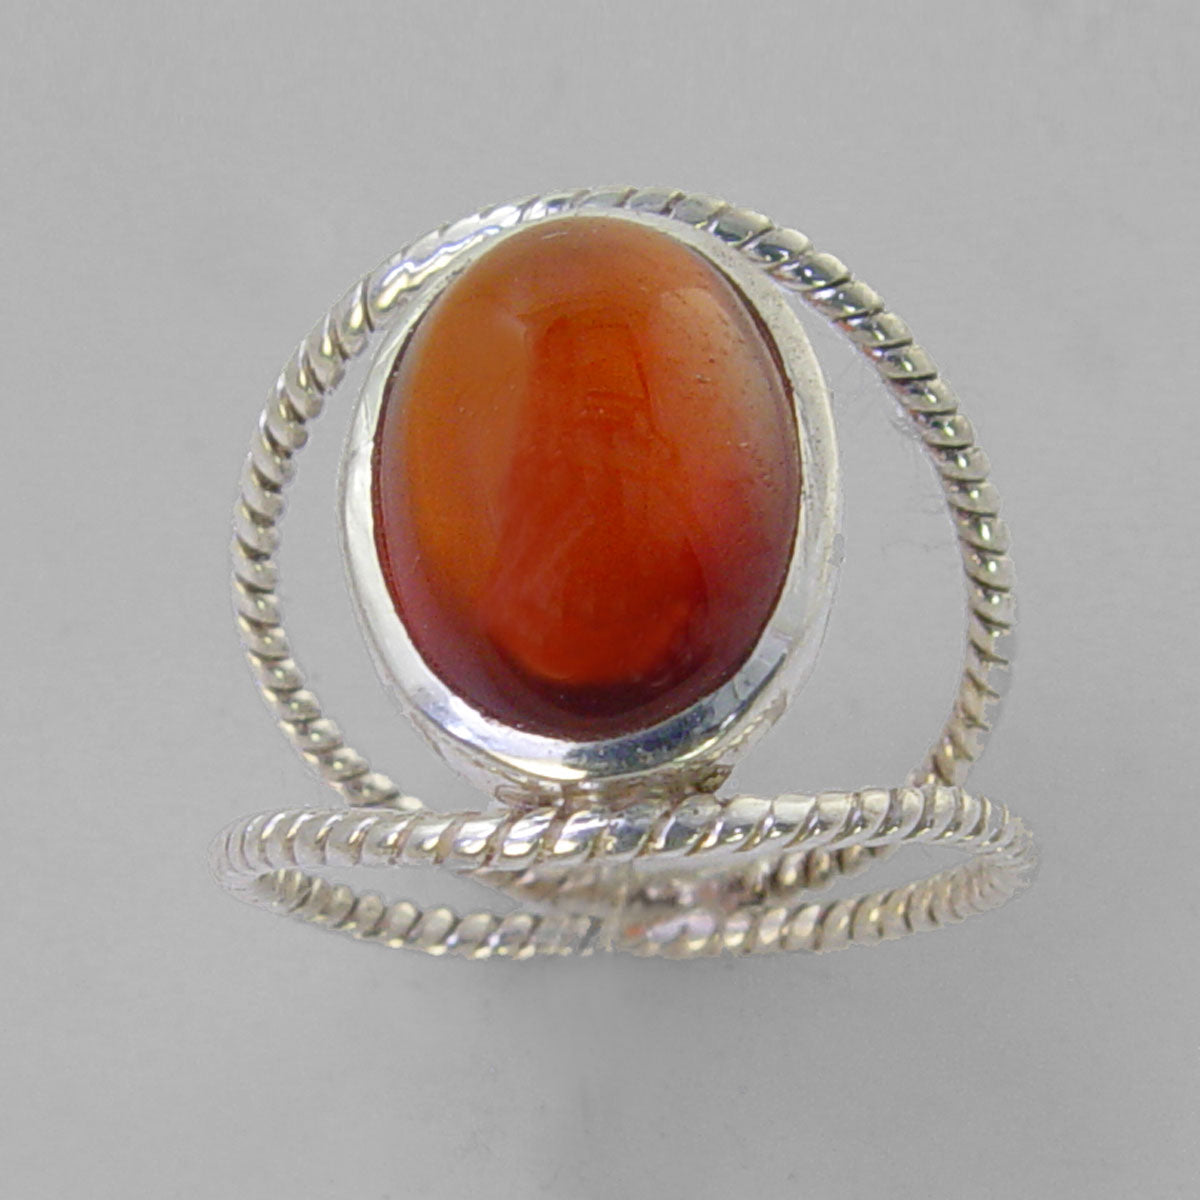 Cinnamon Hessonite Garnet 8.5 ct Oval Cab Sterling Silver Ring, Size 8.5